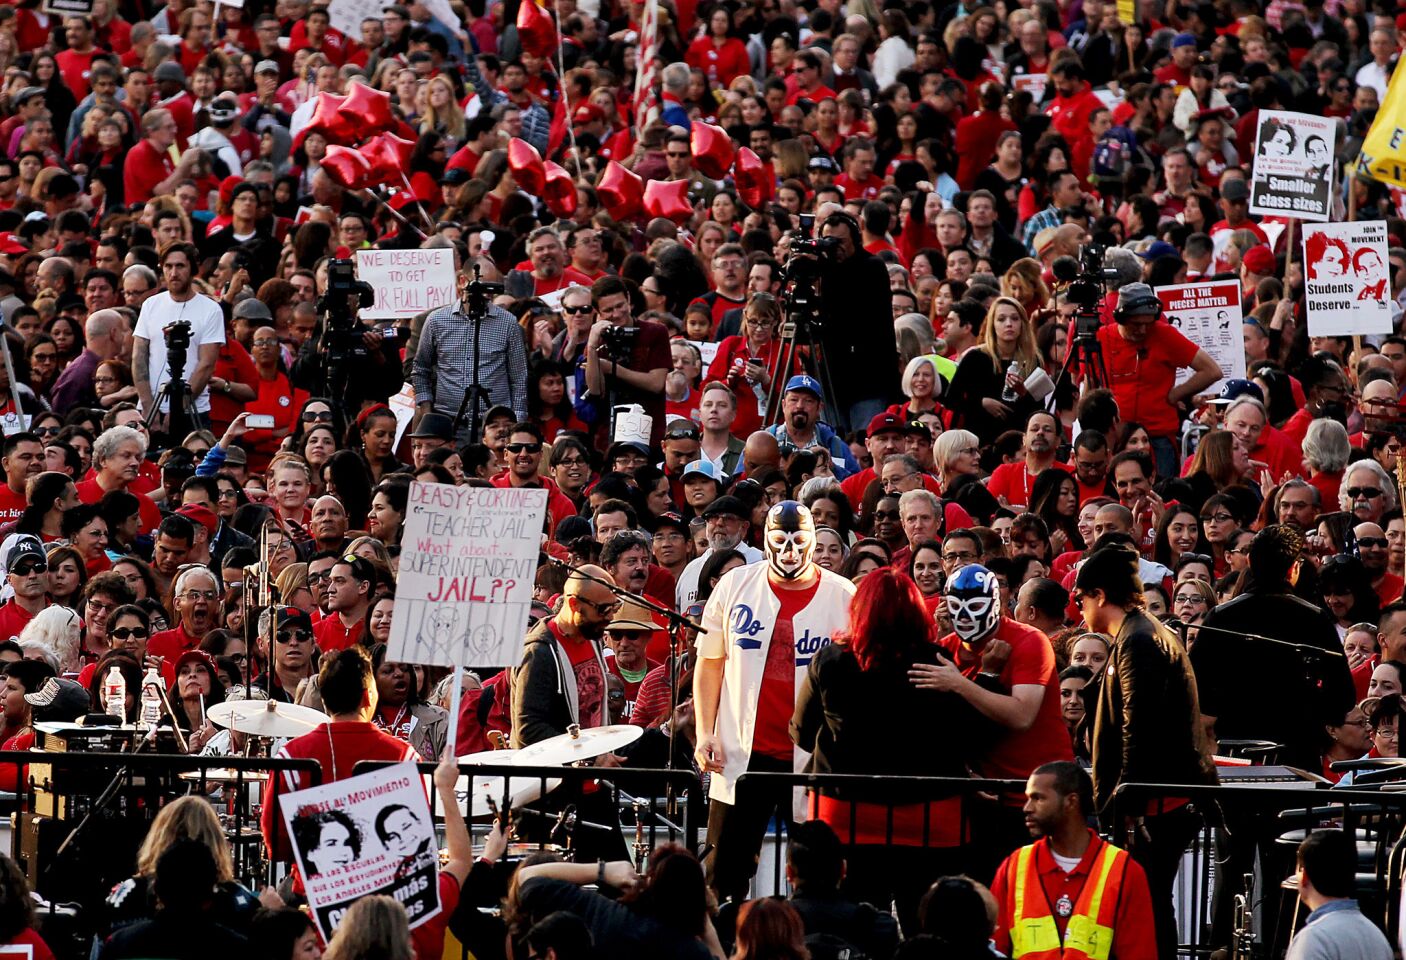 Thousands of teachers from throughout the L.A. Unified School District rally in downtown's Grand Park on Feb. 26 to press for contract demands.